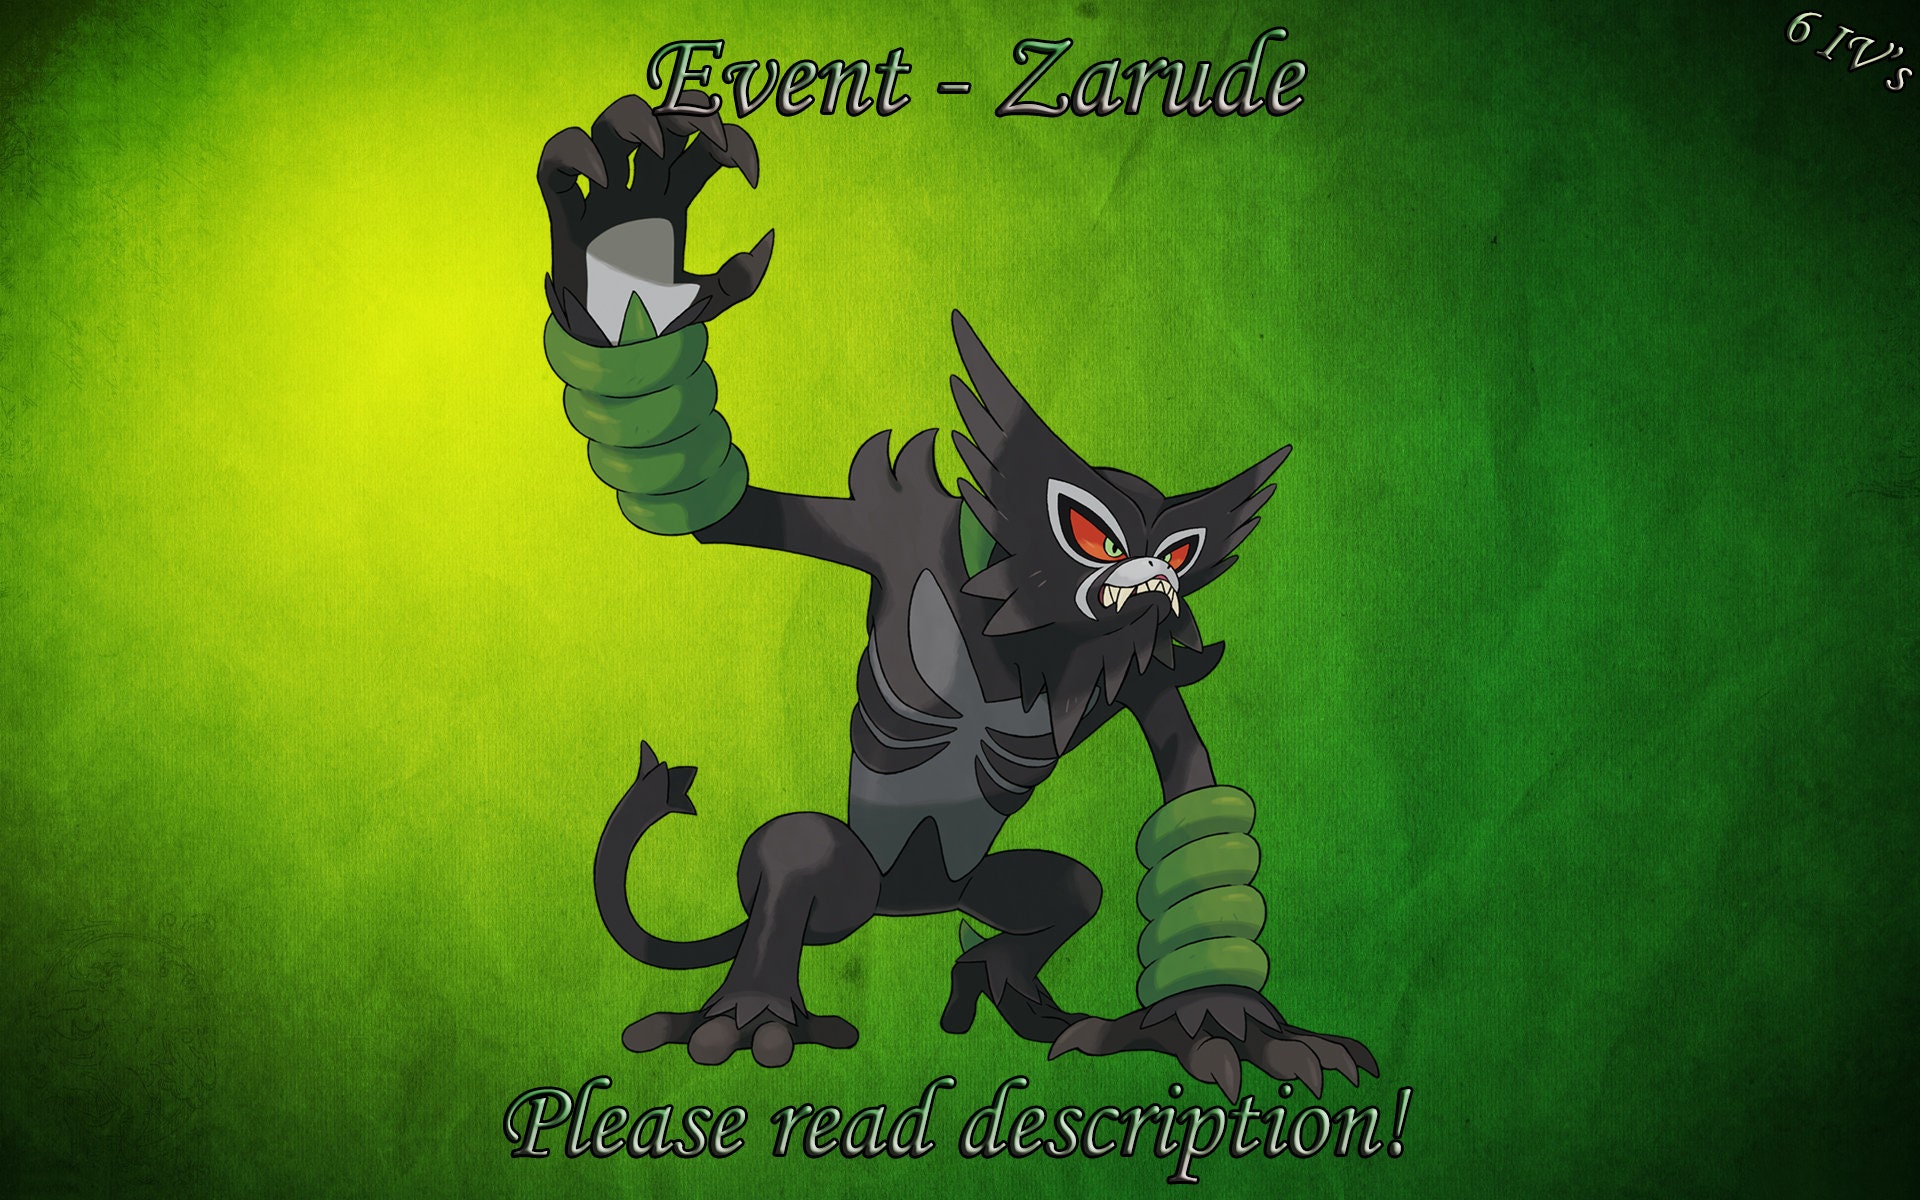 New Mythical Rogue Monkey Pokemon Zarude appears in Sword and Shield